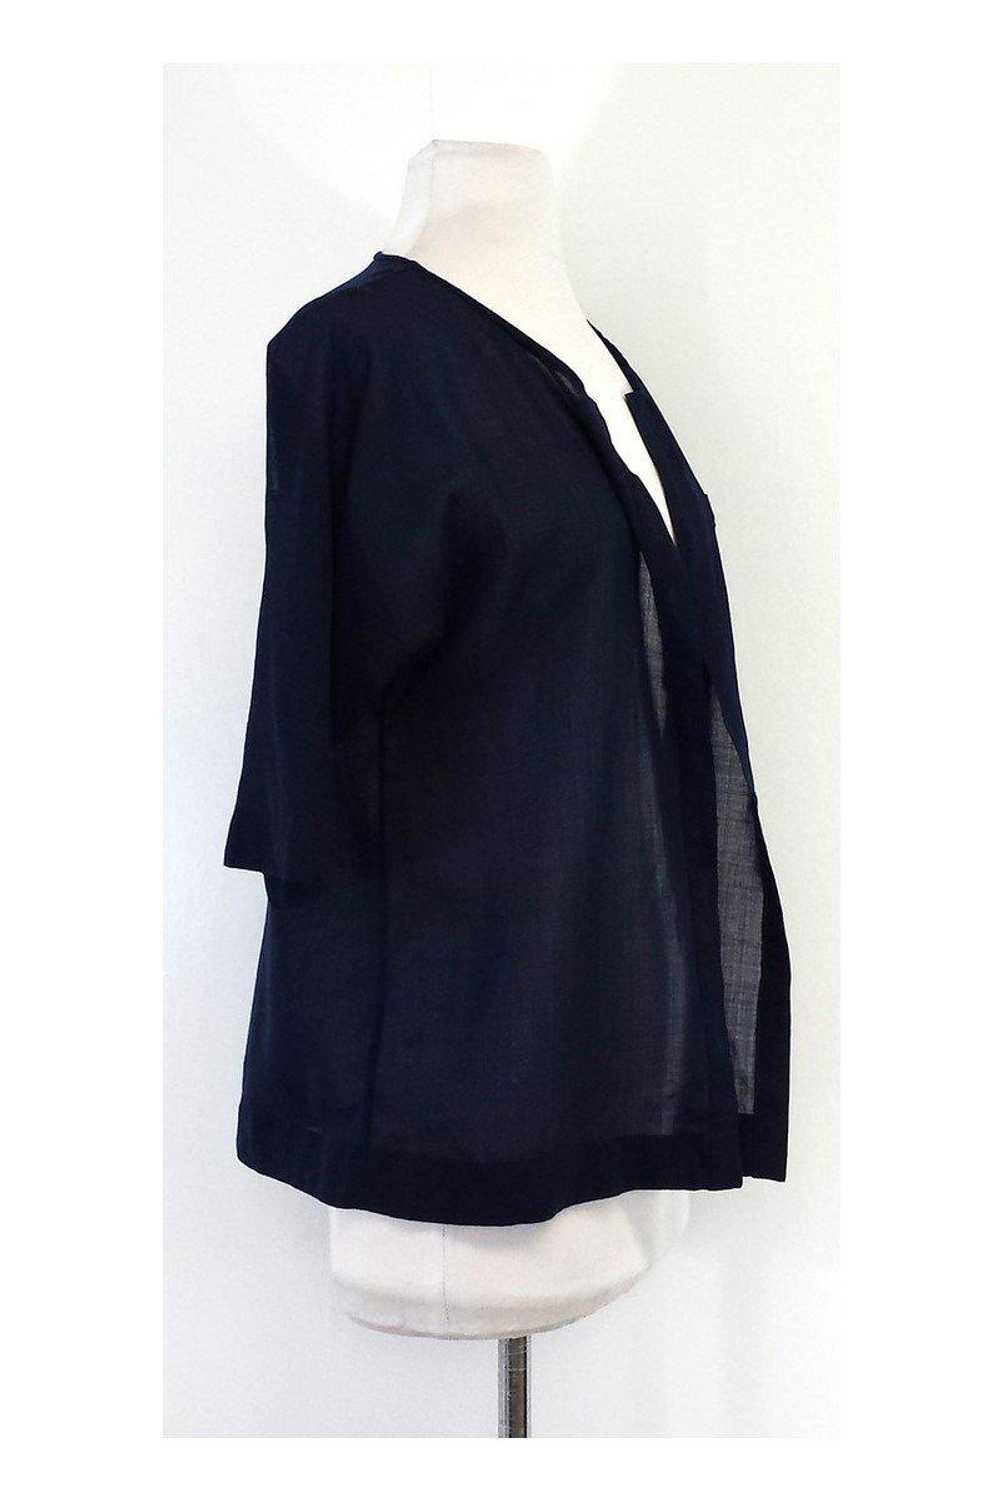 Marc by Marc Jacobs - Navy Open Shirt Sz 2 - image 2